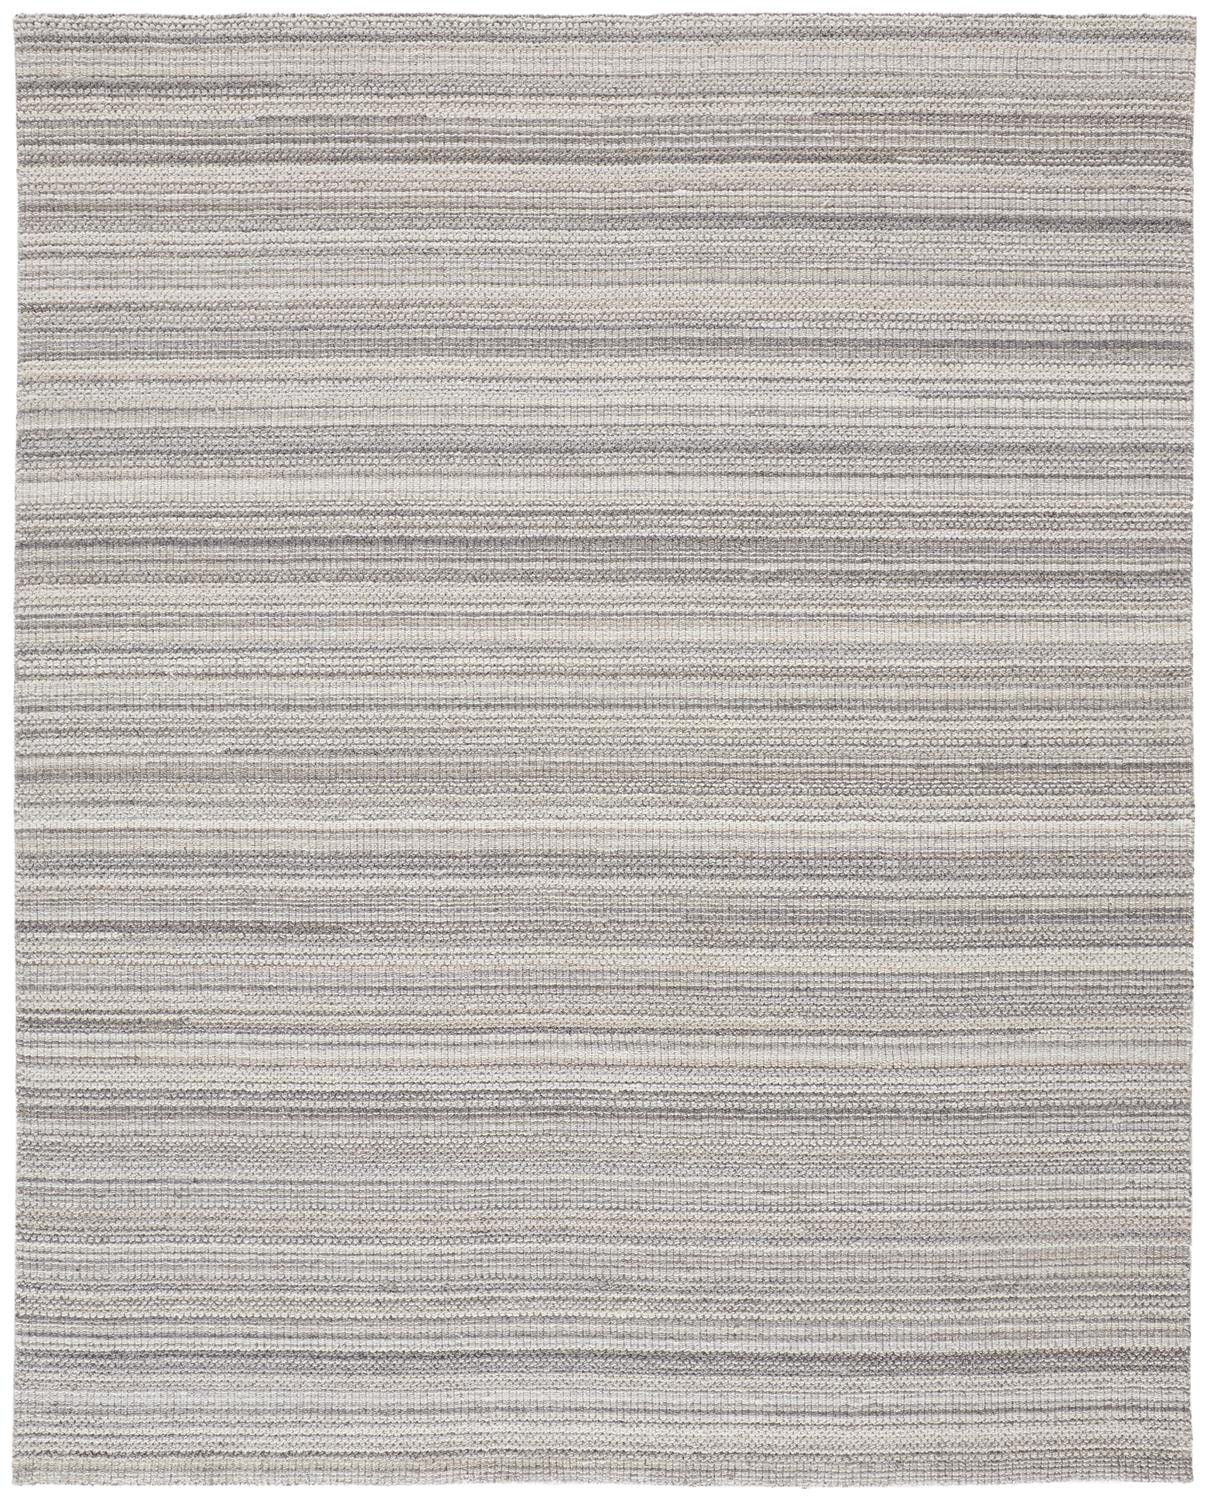 8' X 10' Gray And Taupe Wool Hand Woven Stain Resistant Area Rug-514046-1